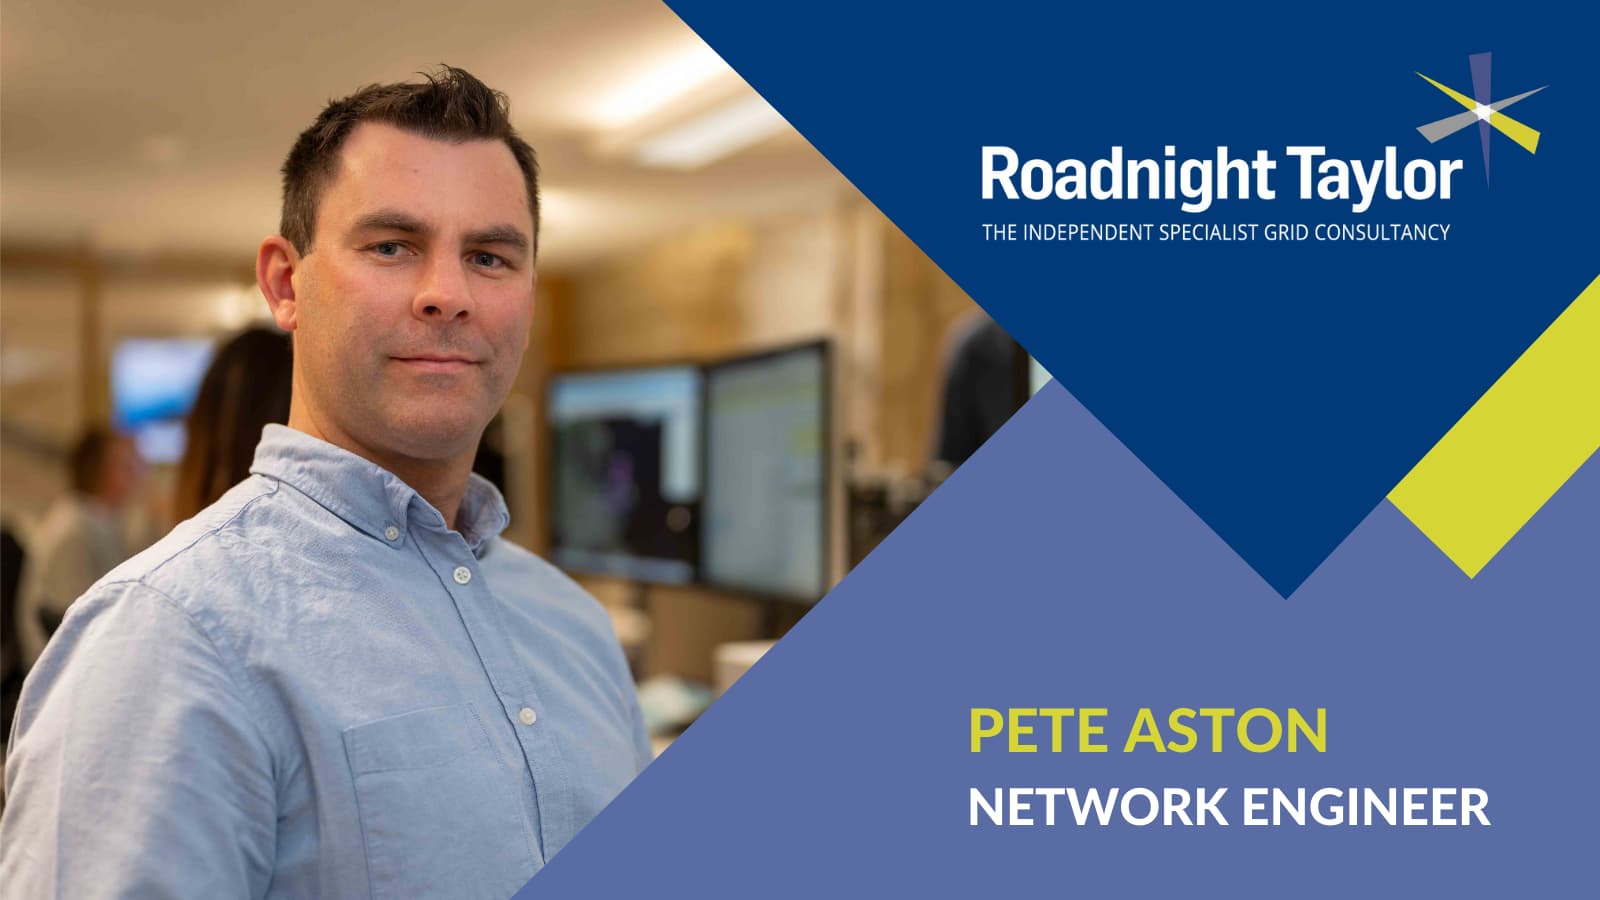 Pete Aston joins Roadnight Taylor as Network Engineer